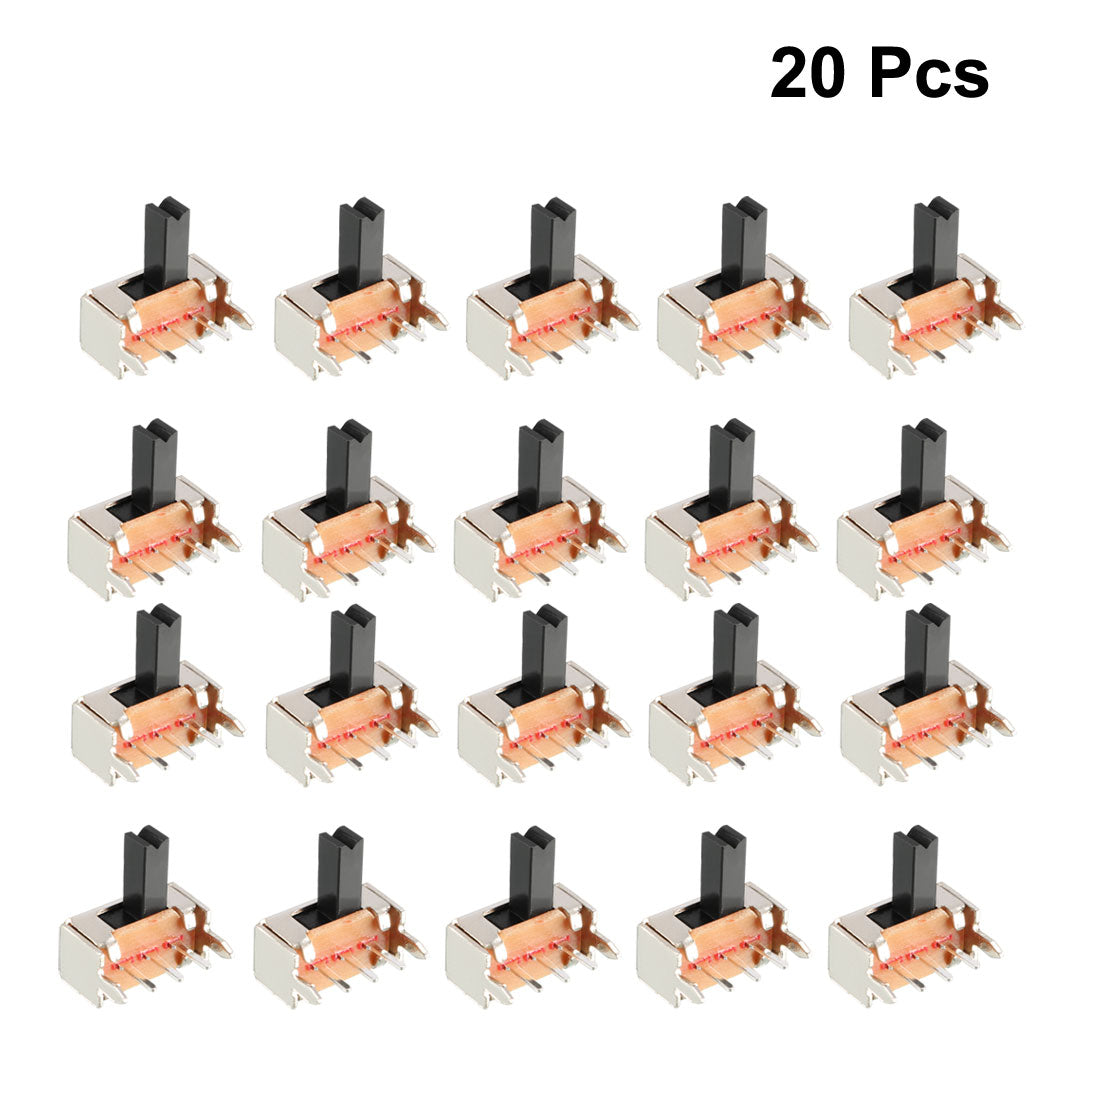 uxcell Uxcell 20Pcs 5mm Horizontal Slide Switch SPDT 1P2T 3 Terminals PCB Panel Latching